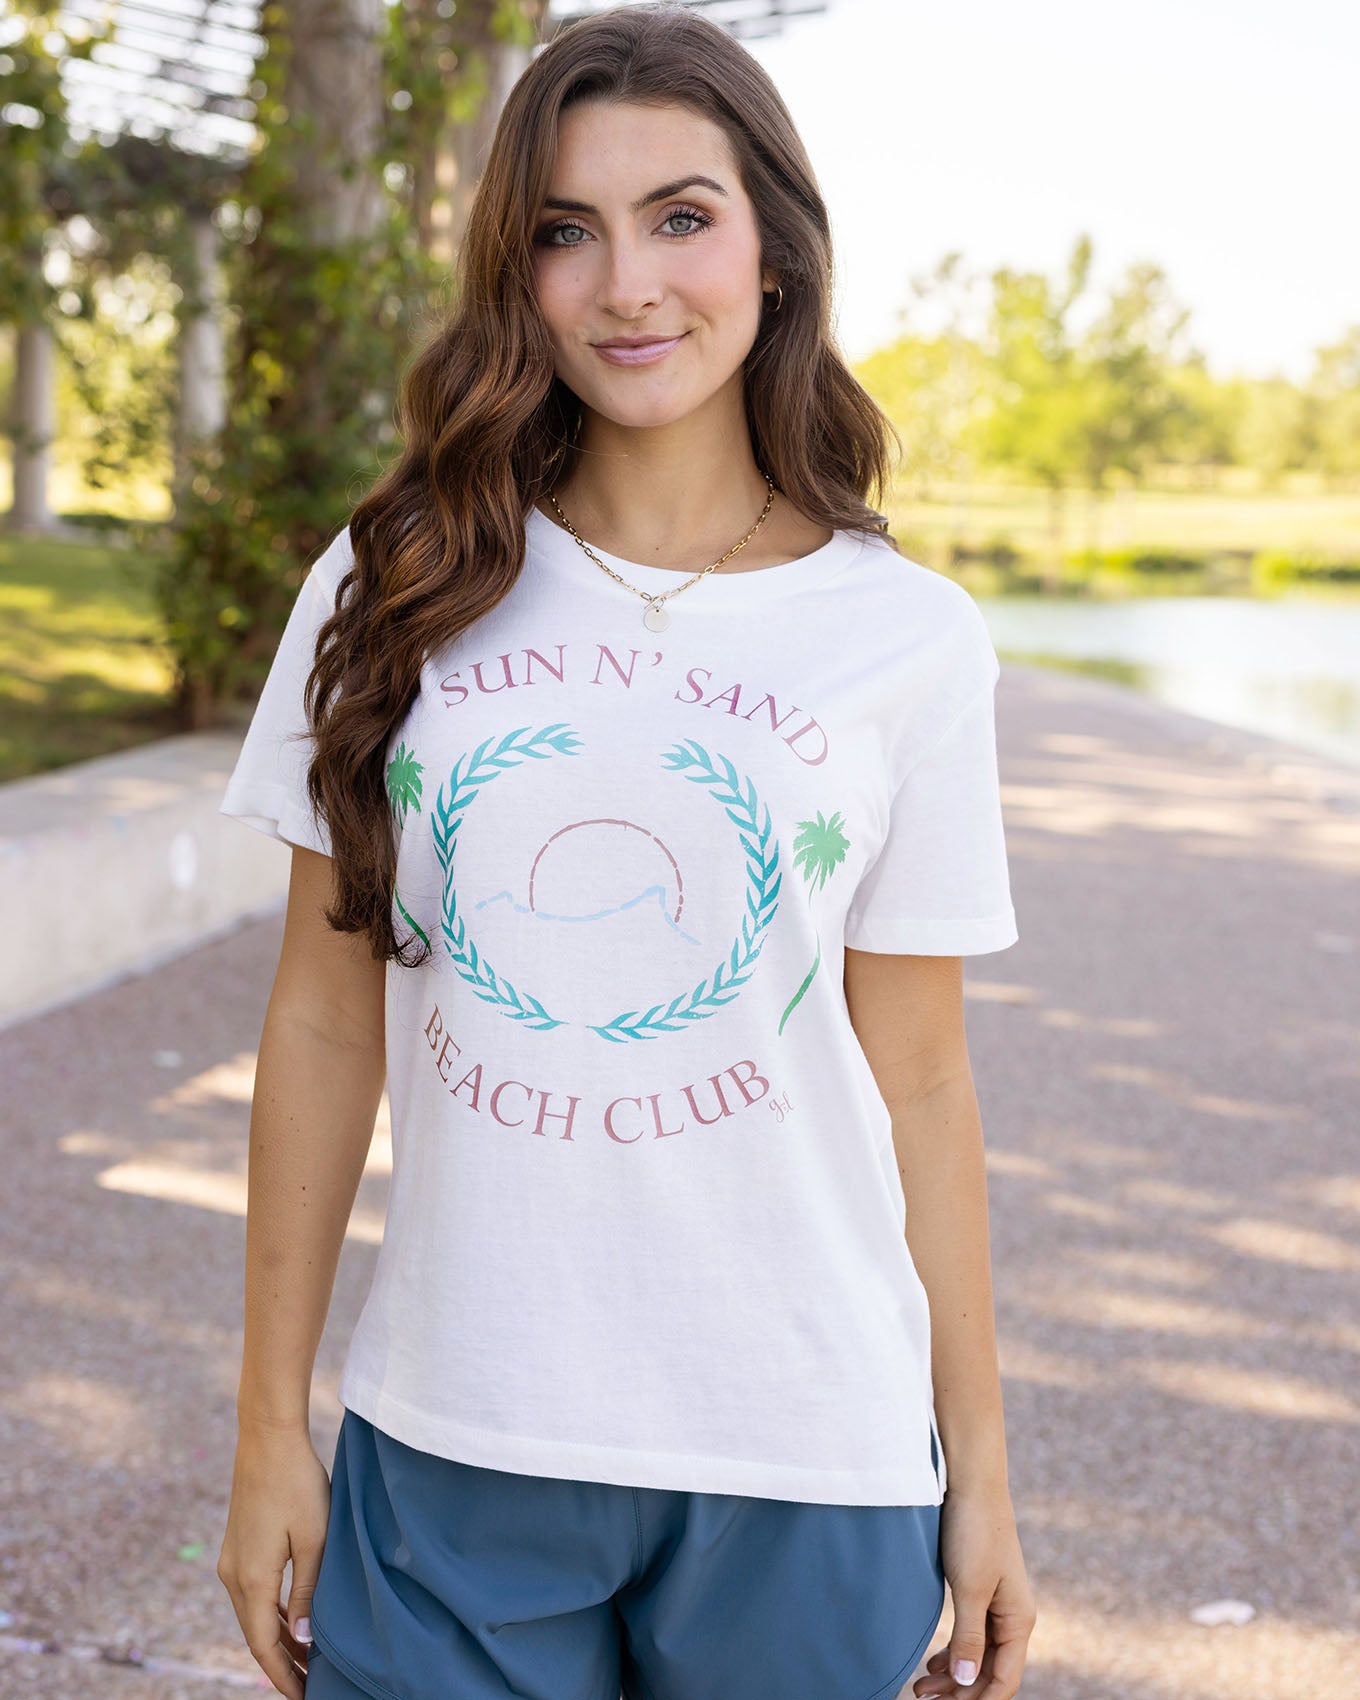 Vintage Fit Any Day Graphic Tee - Beach Club - FINAL SALE - Grace